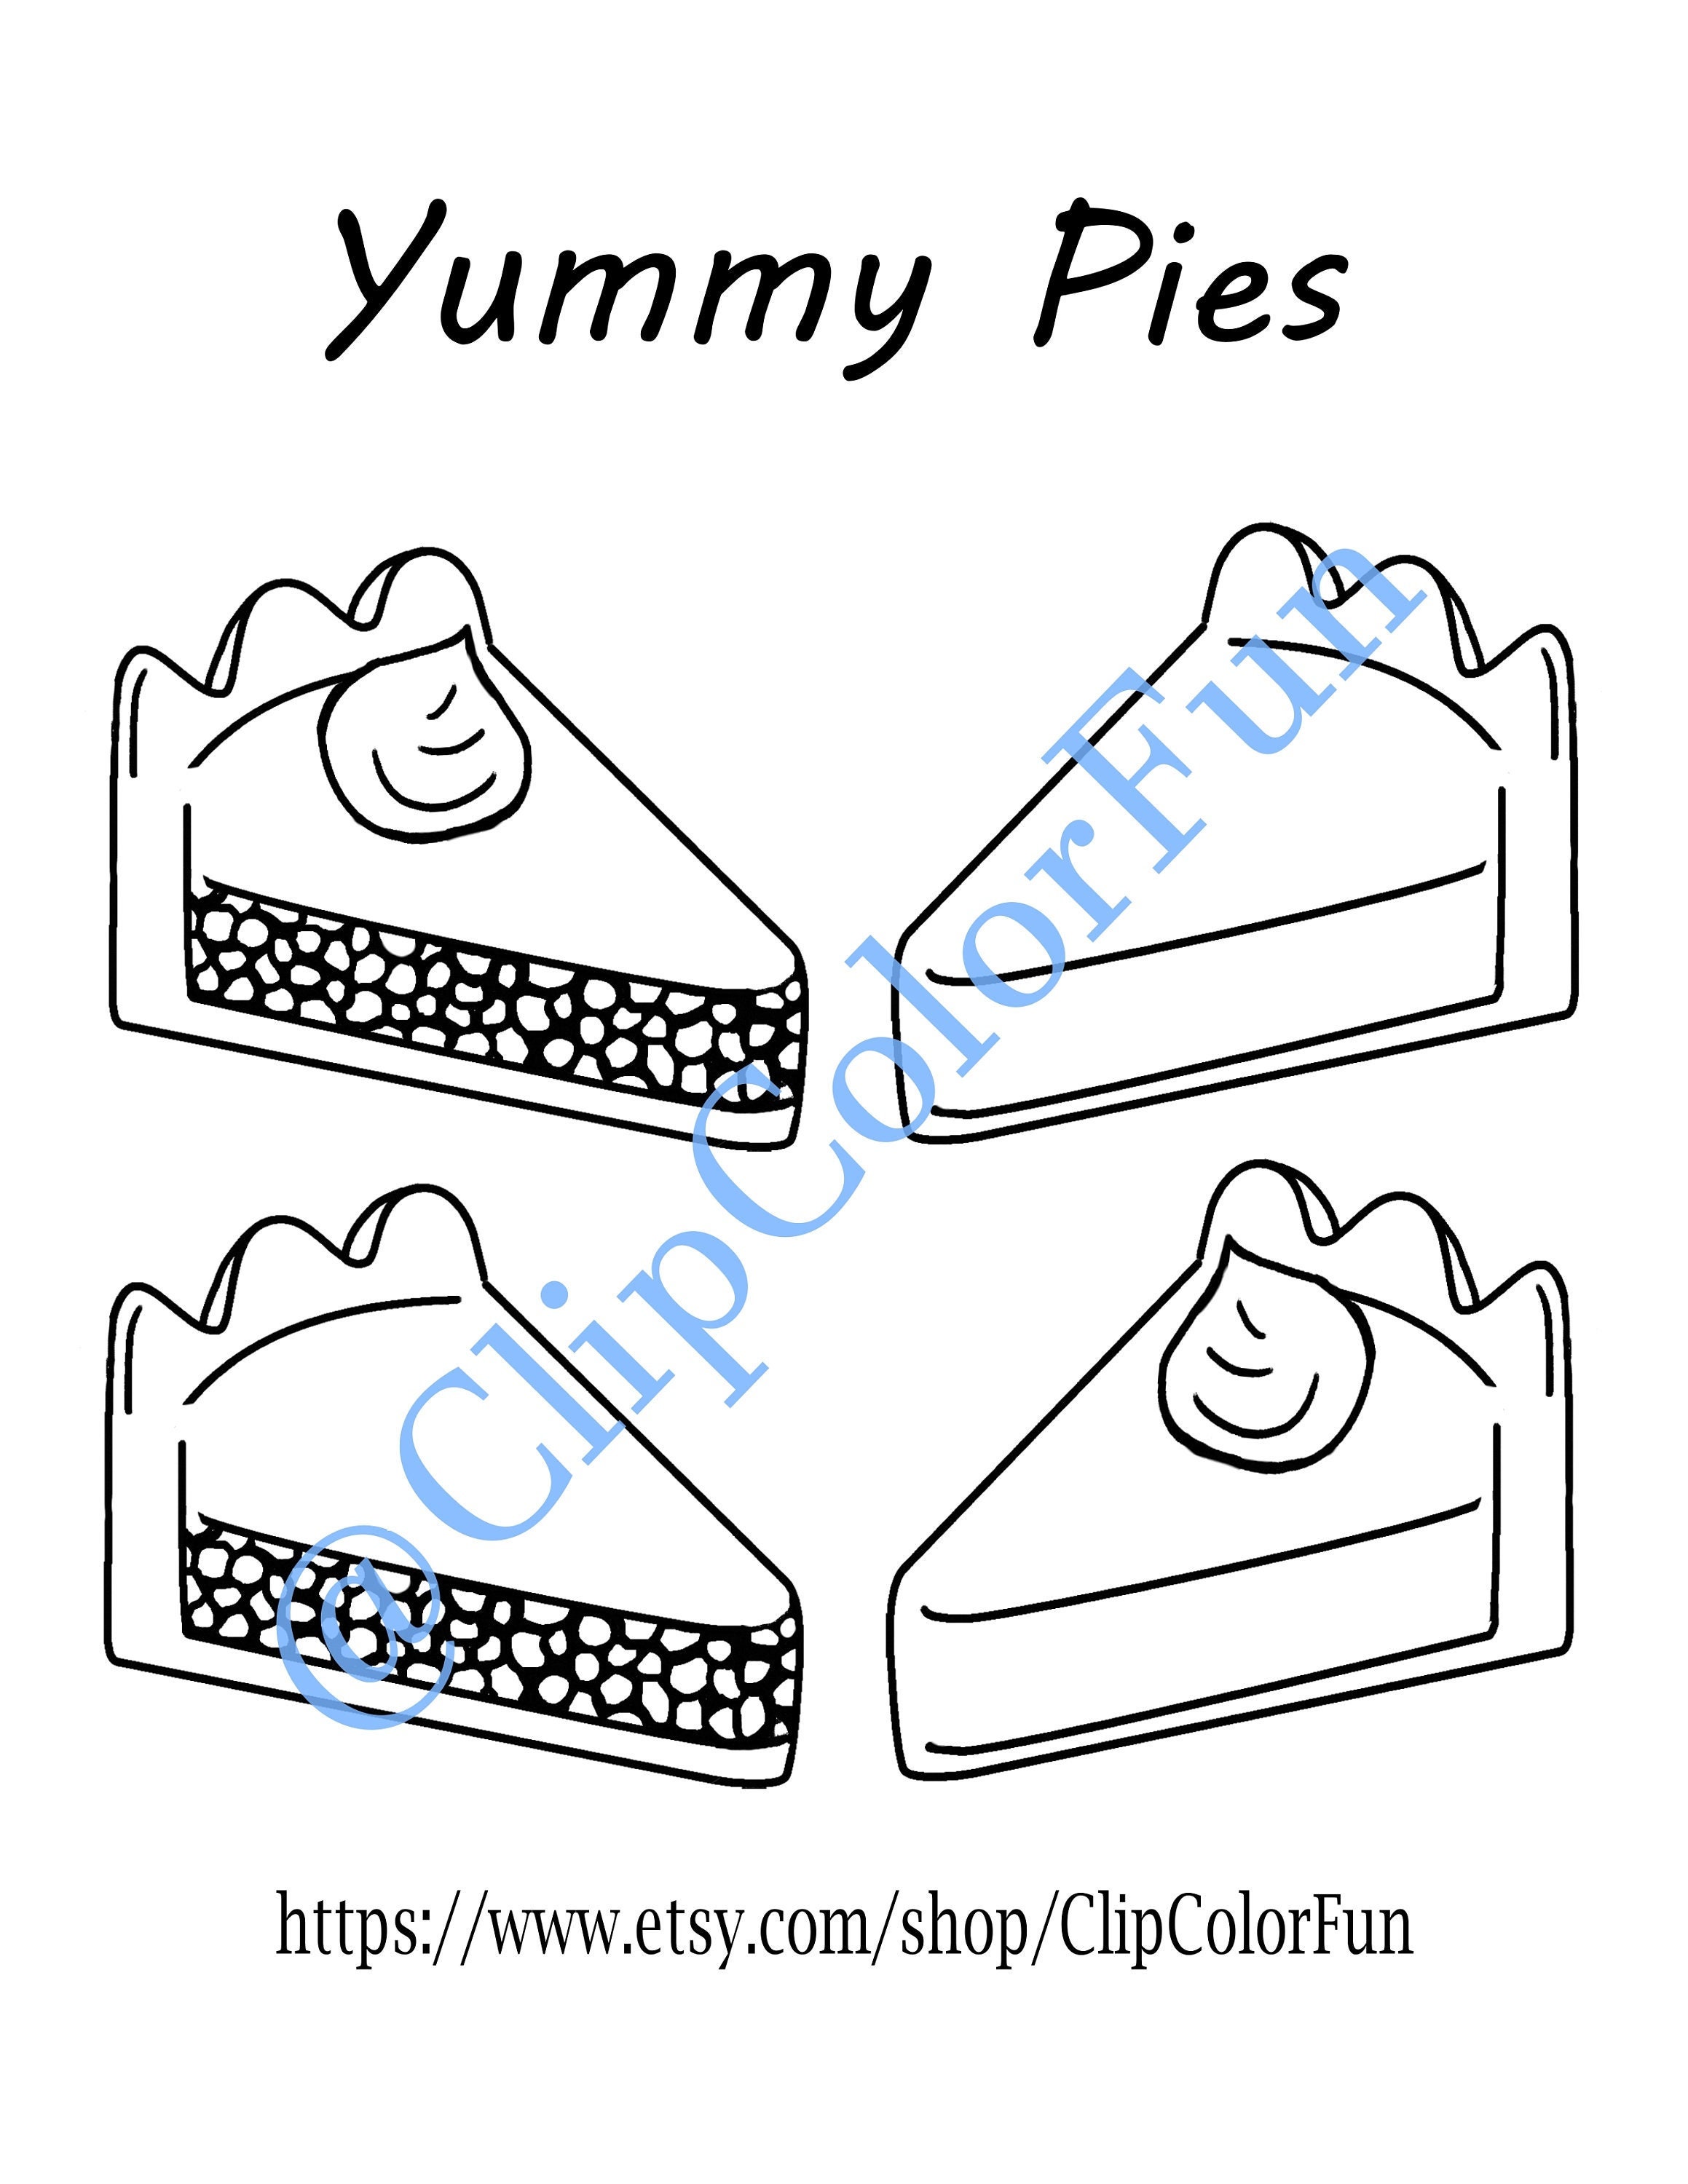 Yummy pies coloring page adult and kids coloring book page